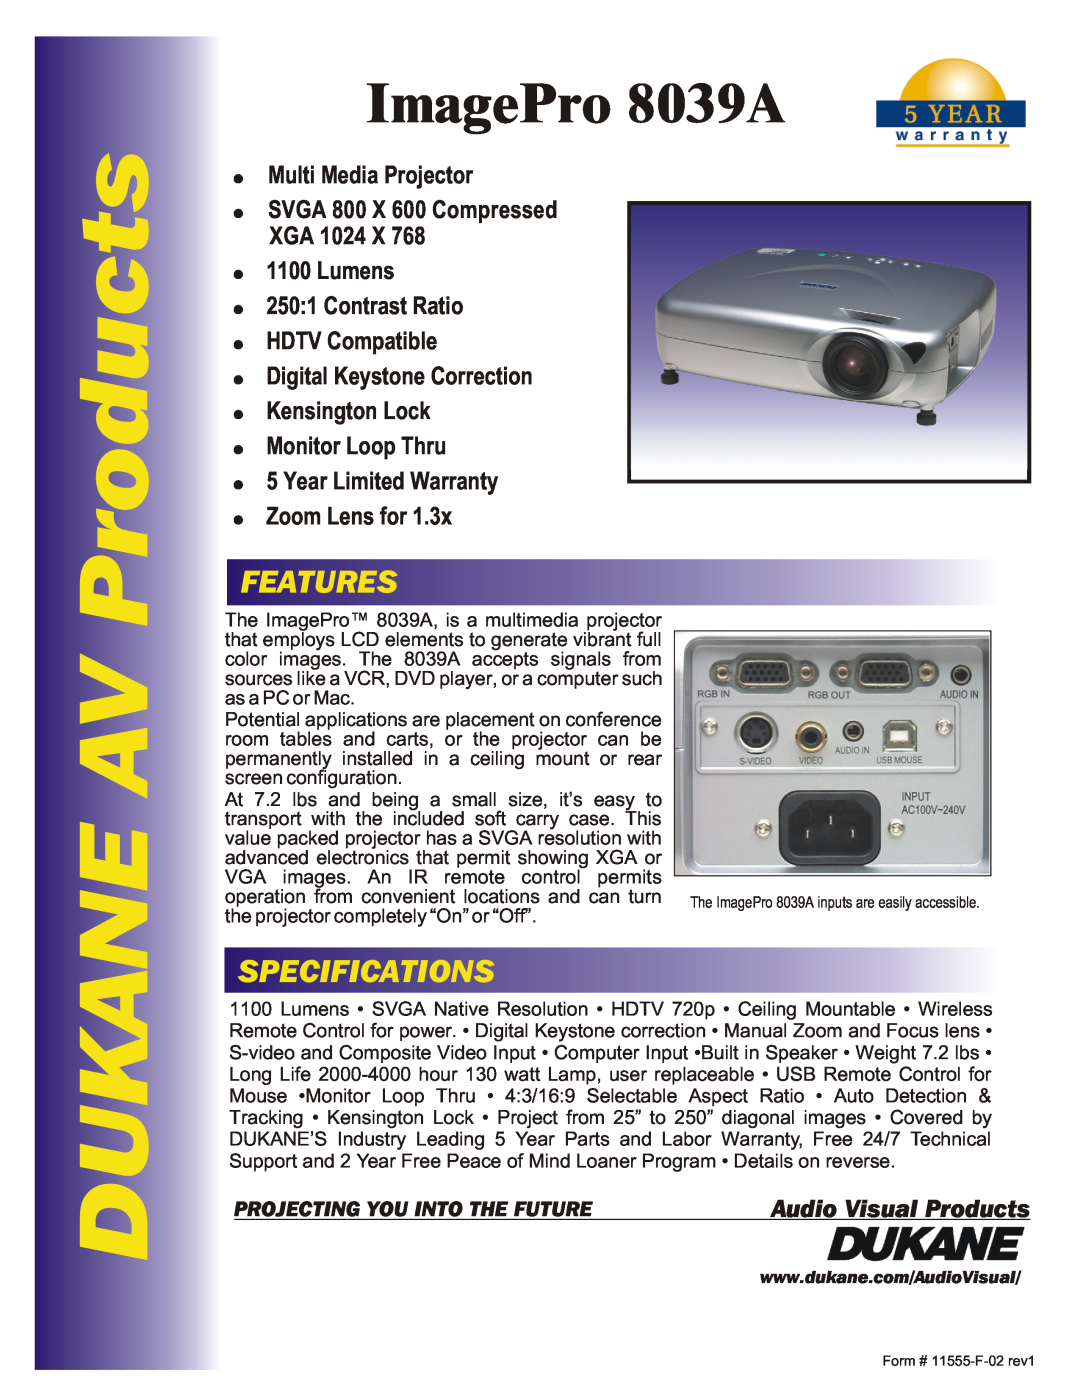 Dukane 8038A specifications DUKANE AV Products, ImagePro 8039A, Features, Specifications, Audio Visual Products 